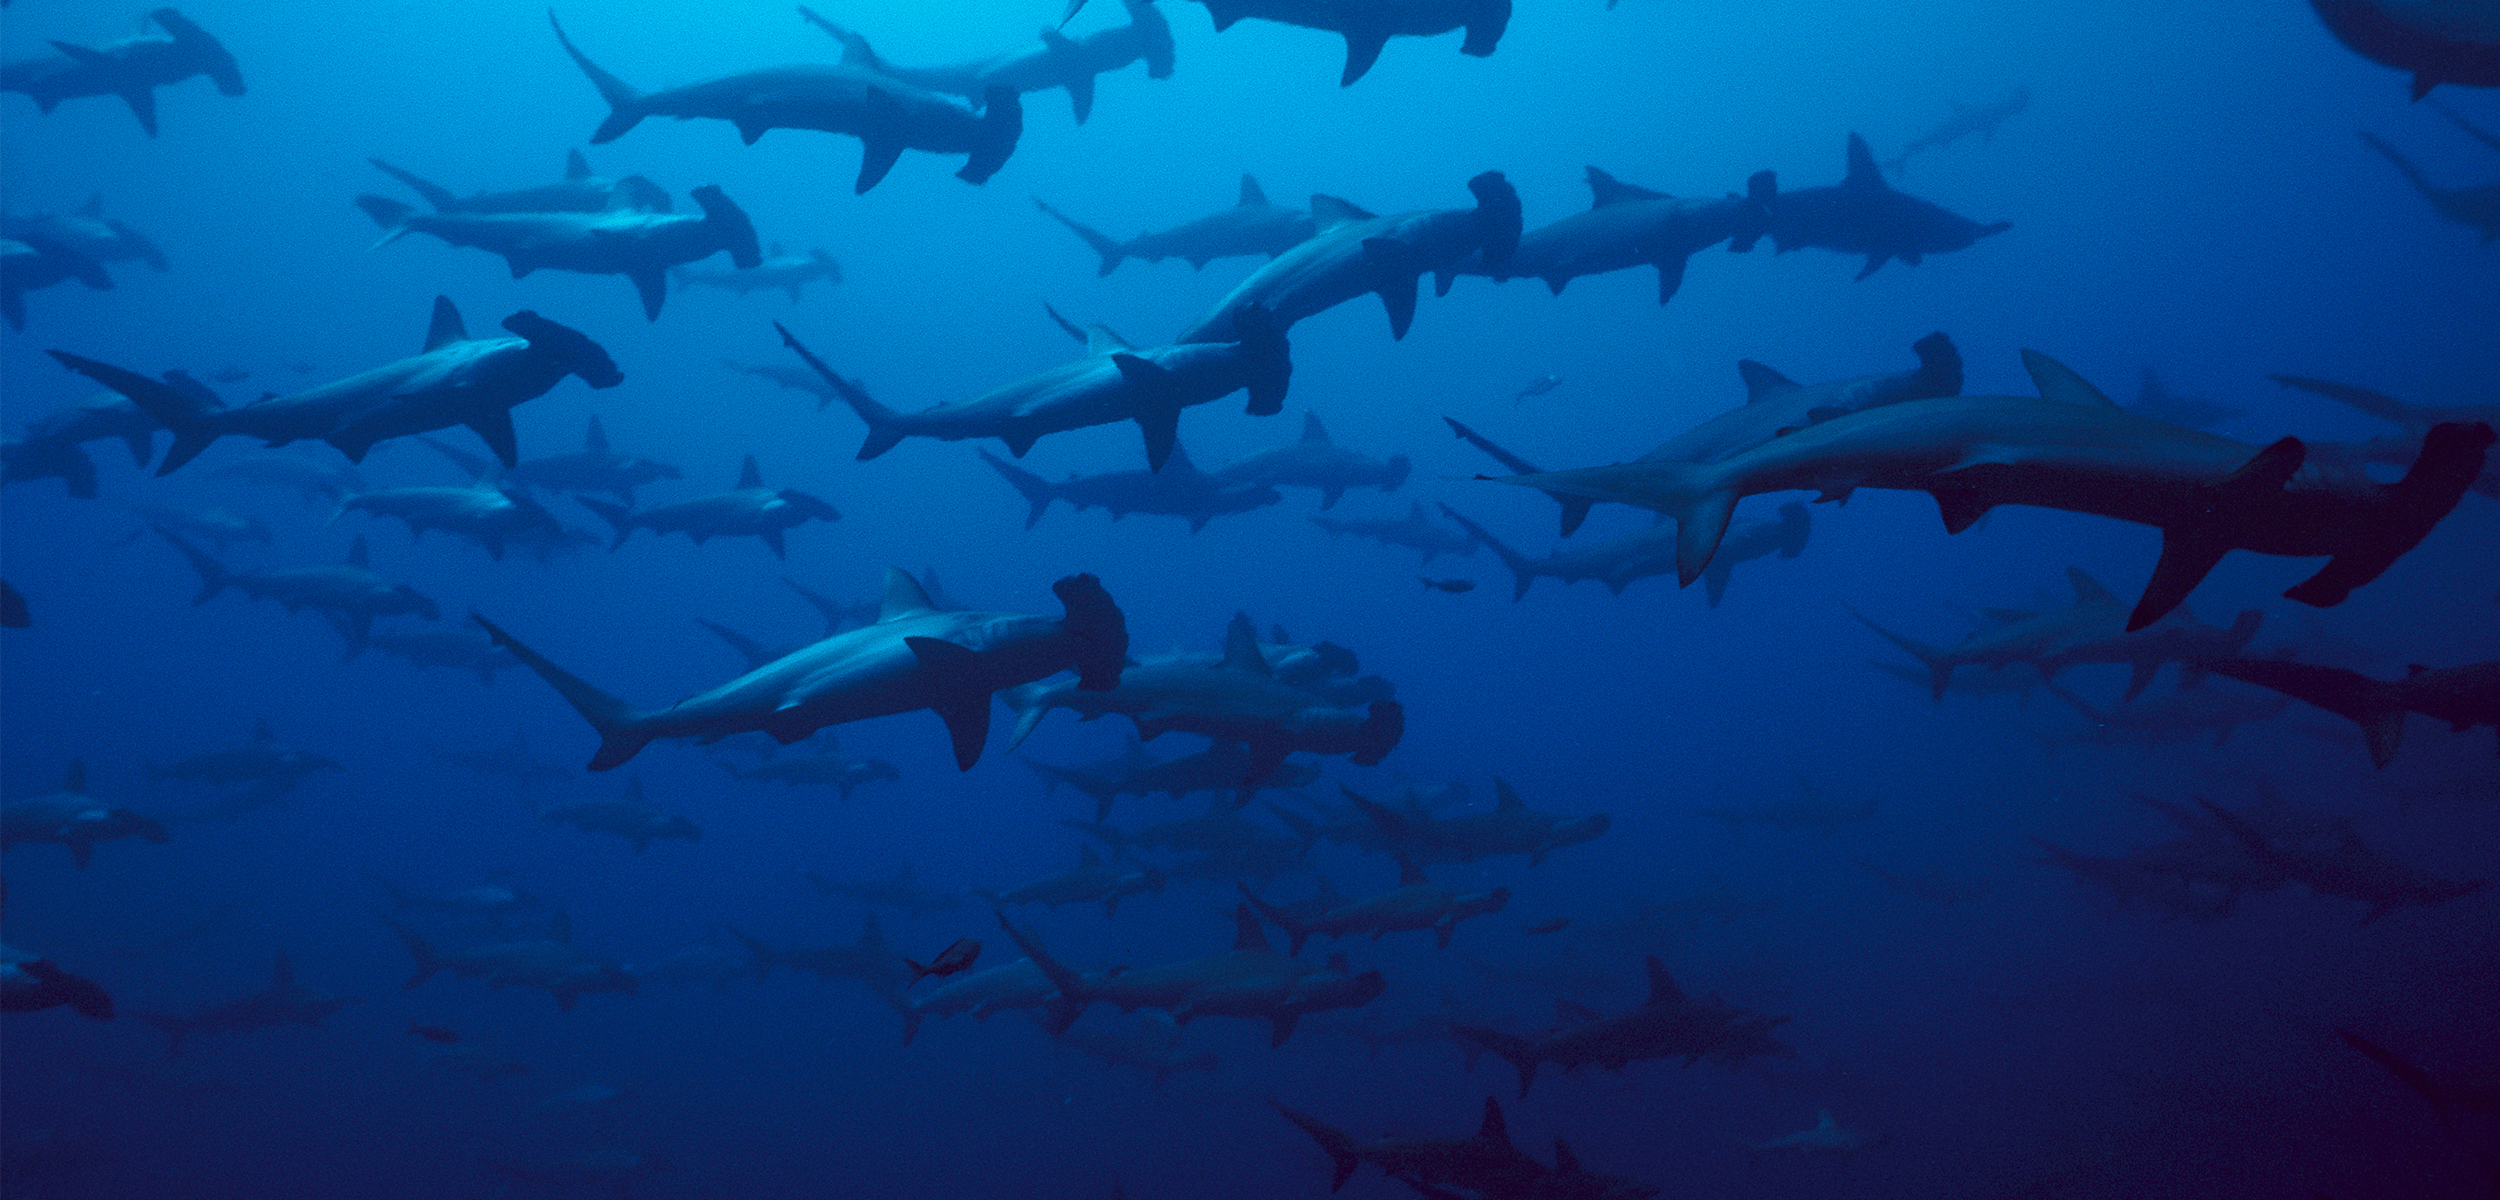 A shot from below of many hammerhead sharks swimming near the surface of a calm blue ocean